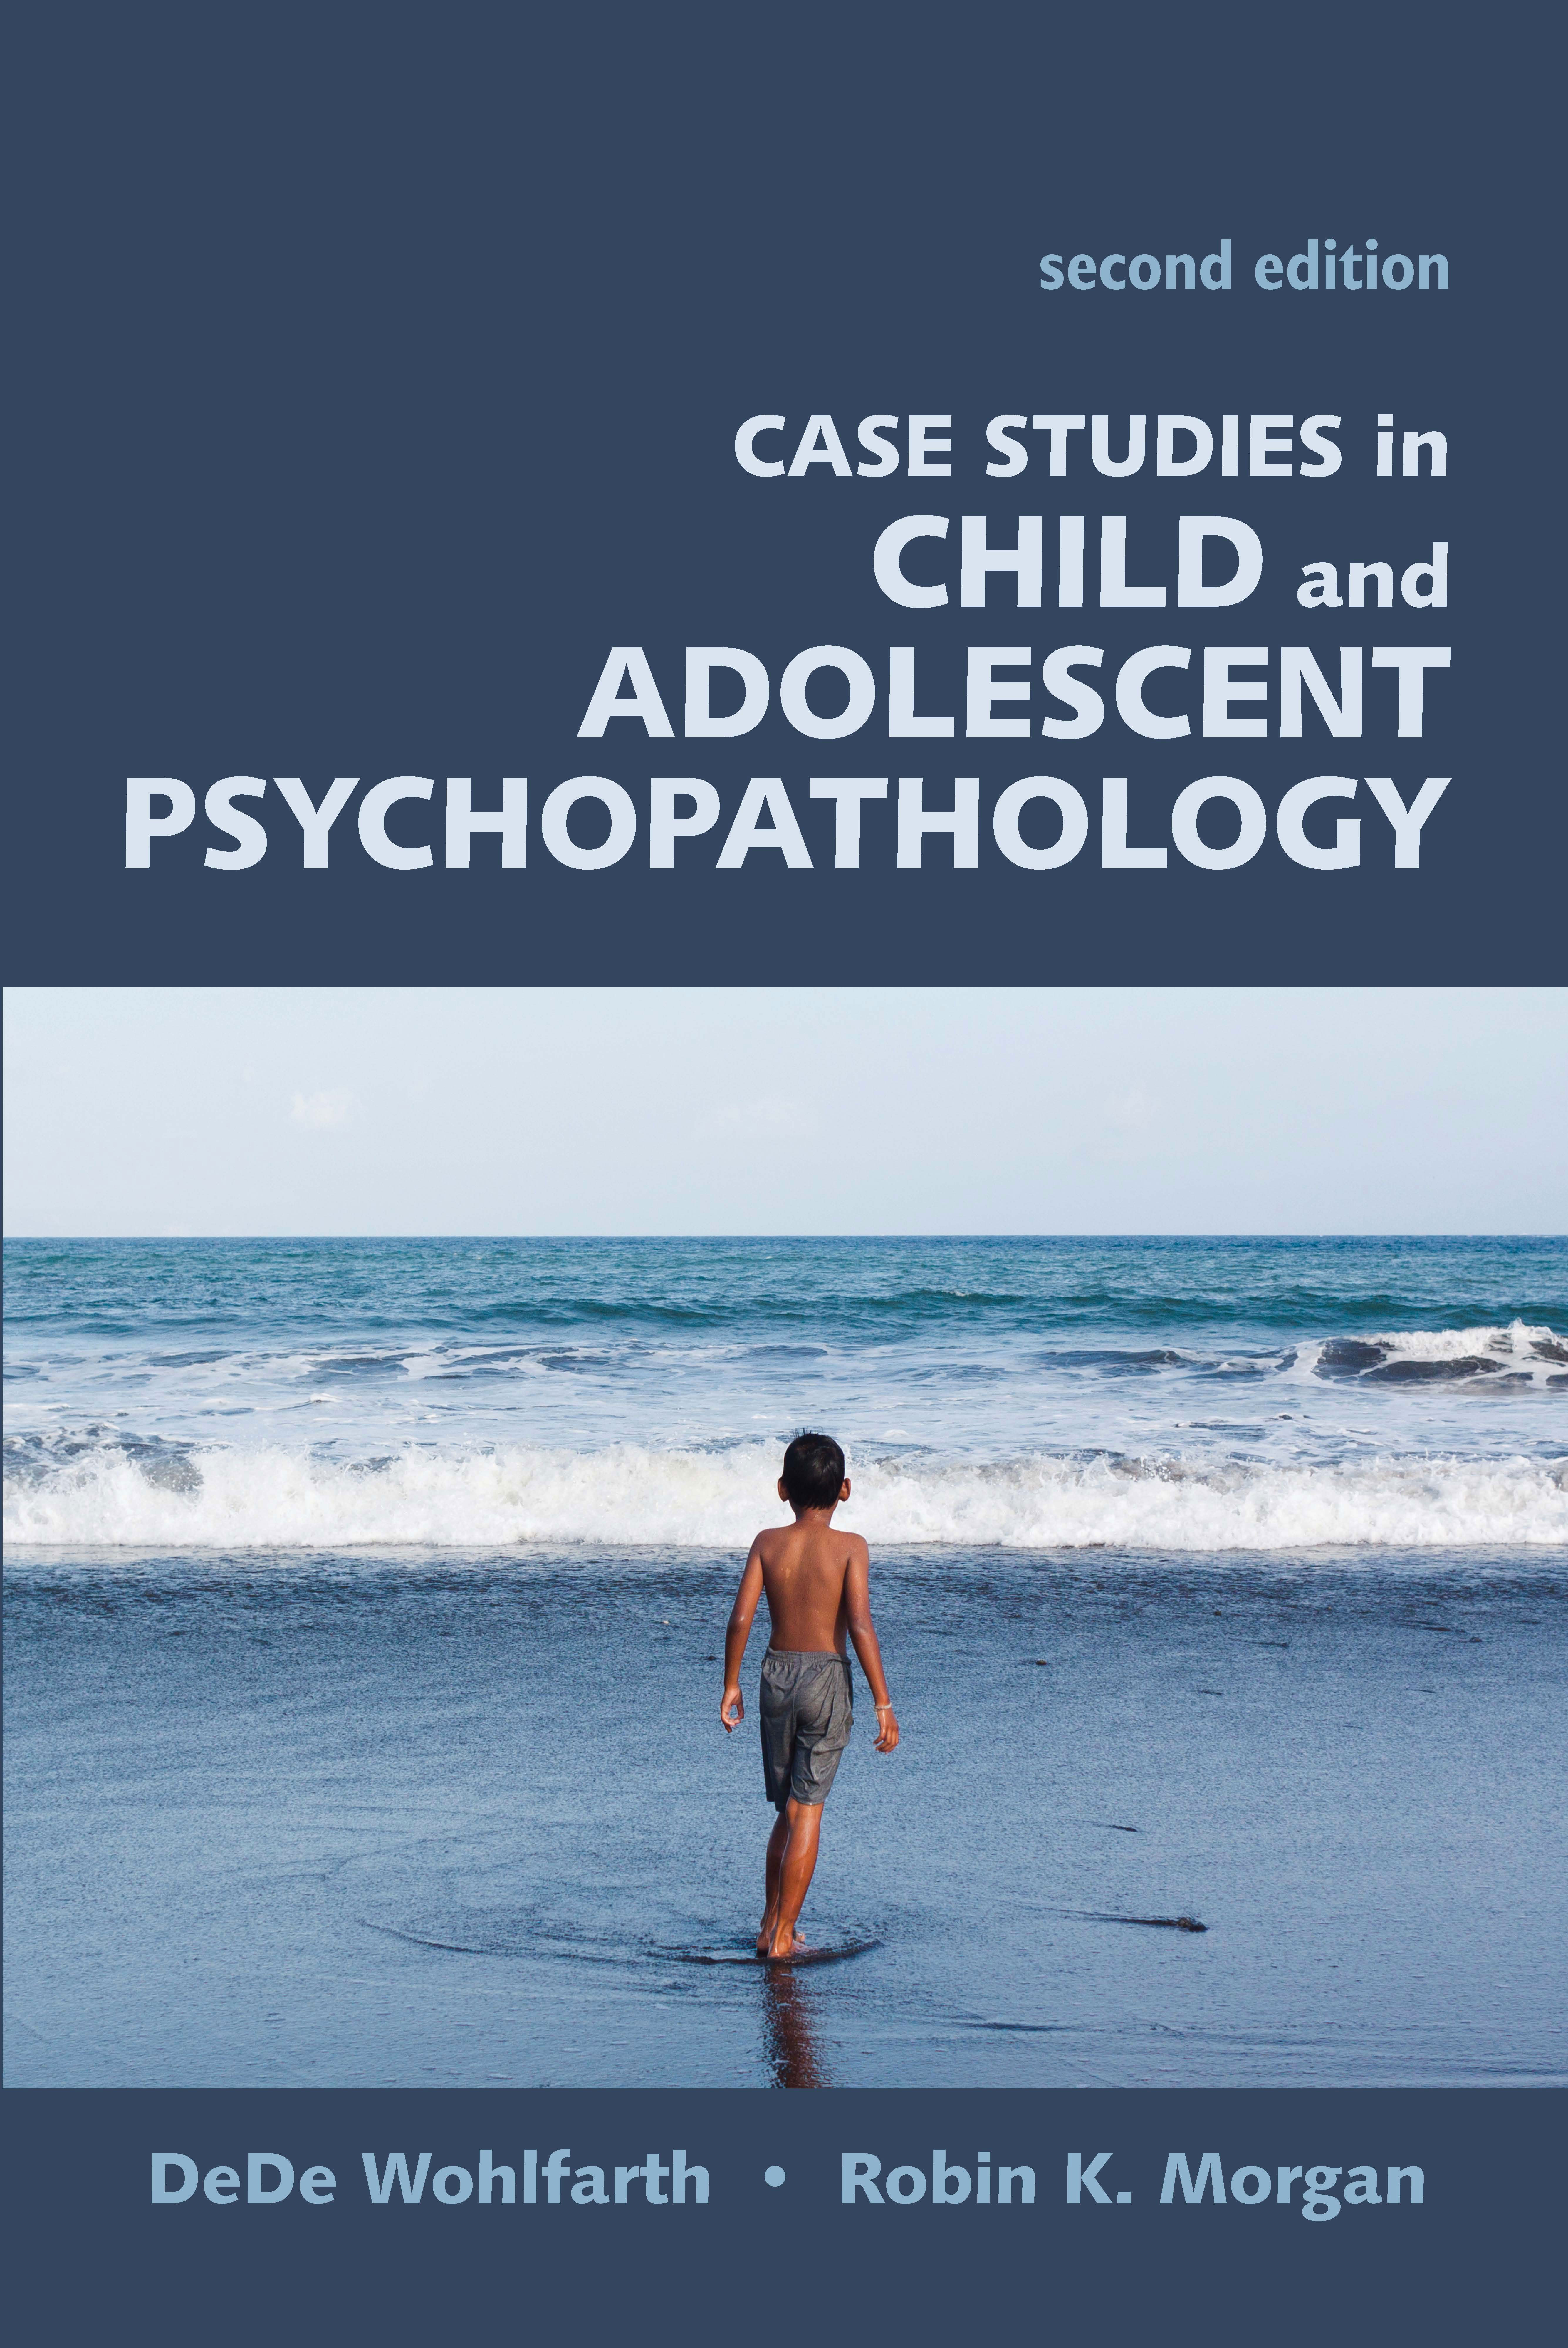 Case Studies in Child and Adolescent Psychopathology: Second Edition by DeDe  Wohlfarth, Robin K. Morgan